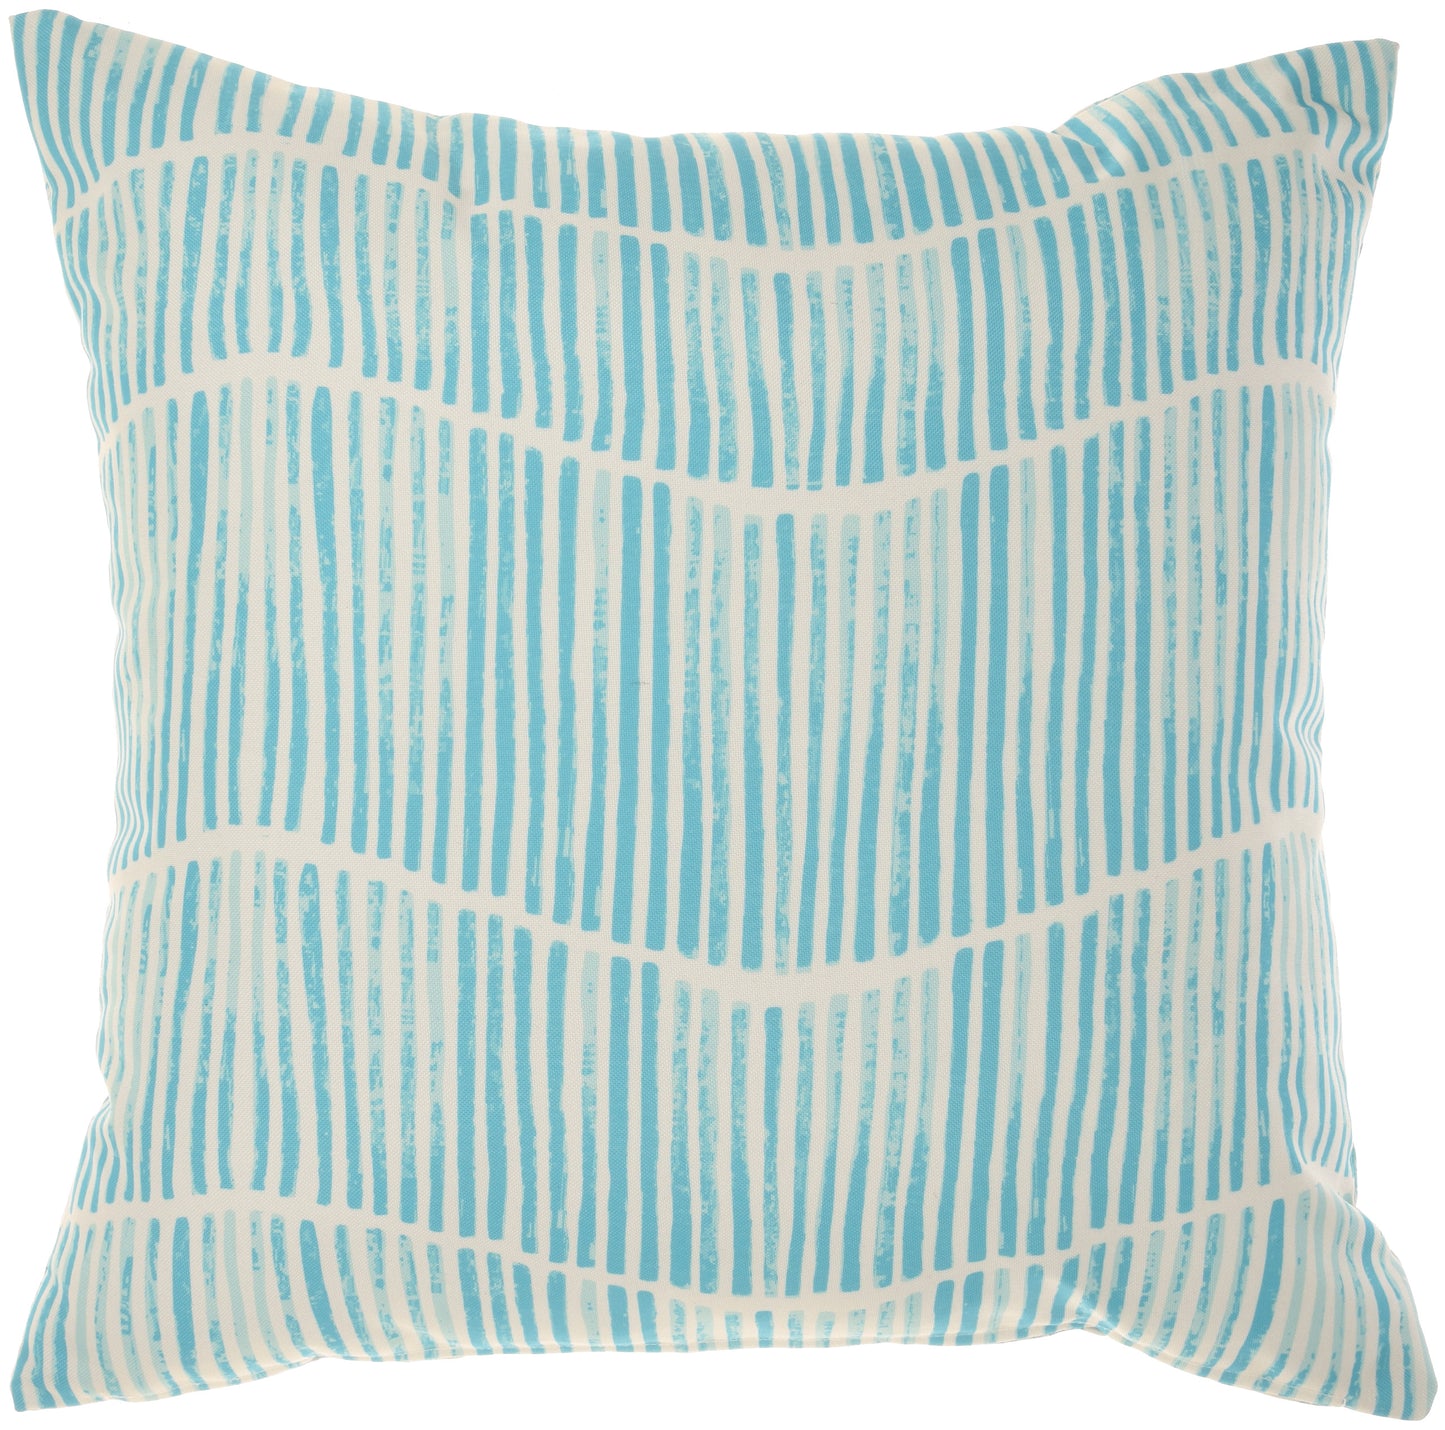 Outdoor Pillows GT133 Synthetic Blend Revers Starfish&Wave Throw Pillow From Mina Victory By Nourison Rugs